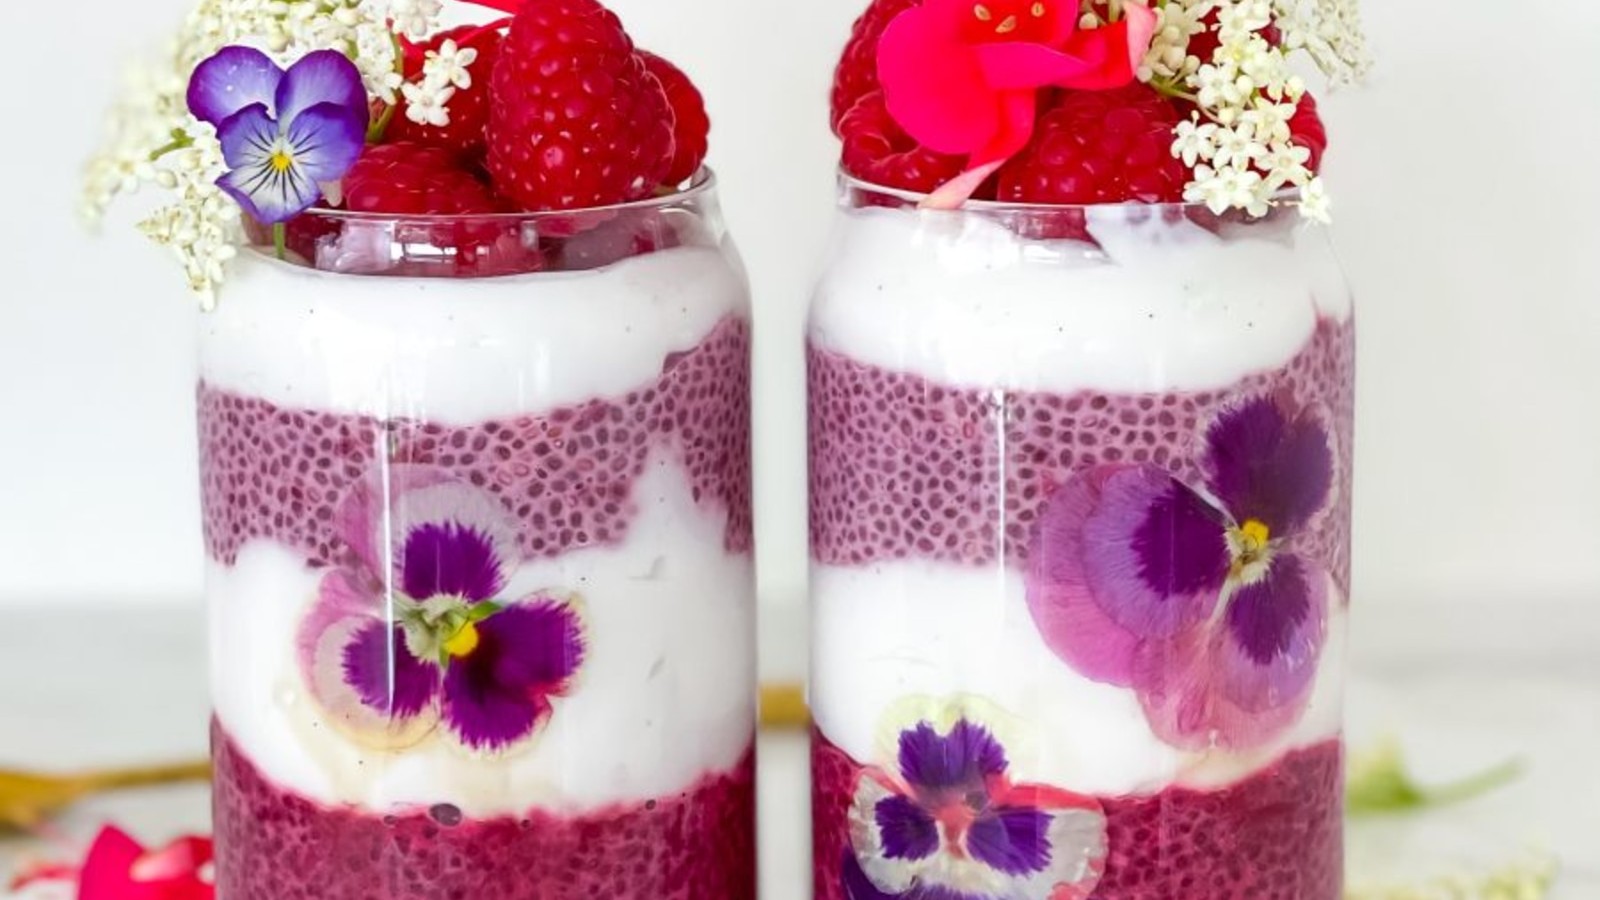 Image of Beetroot Strawberry Chia Pudding